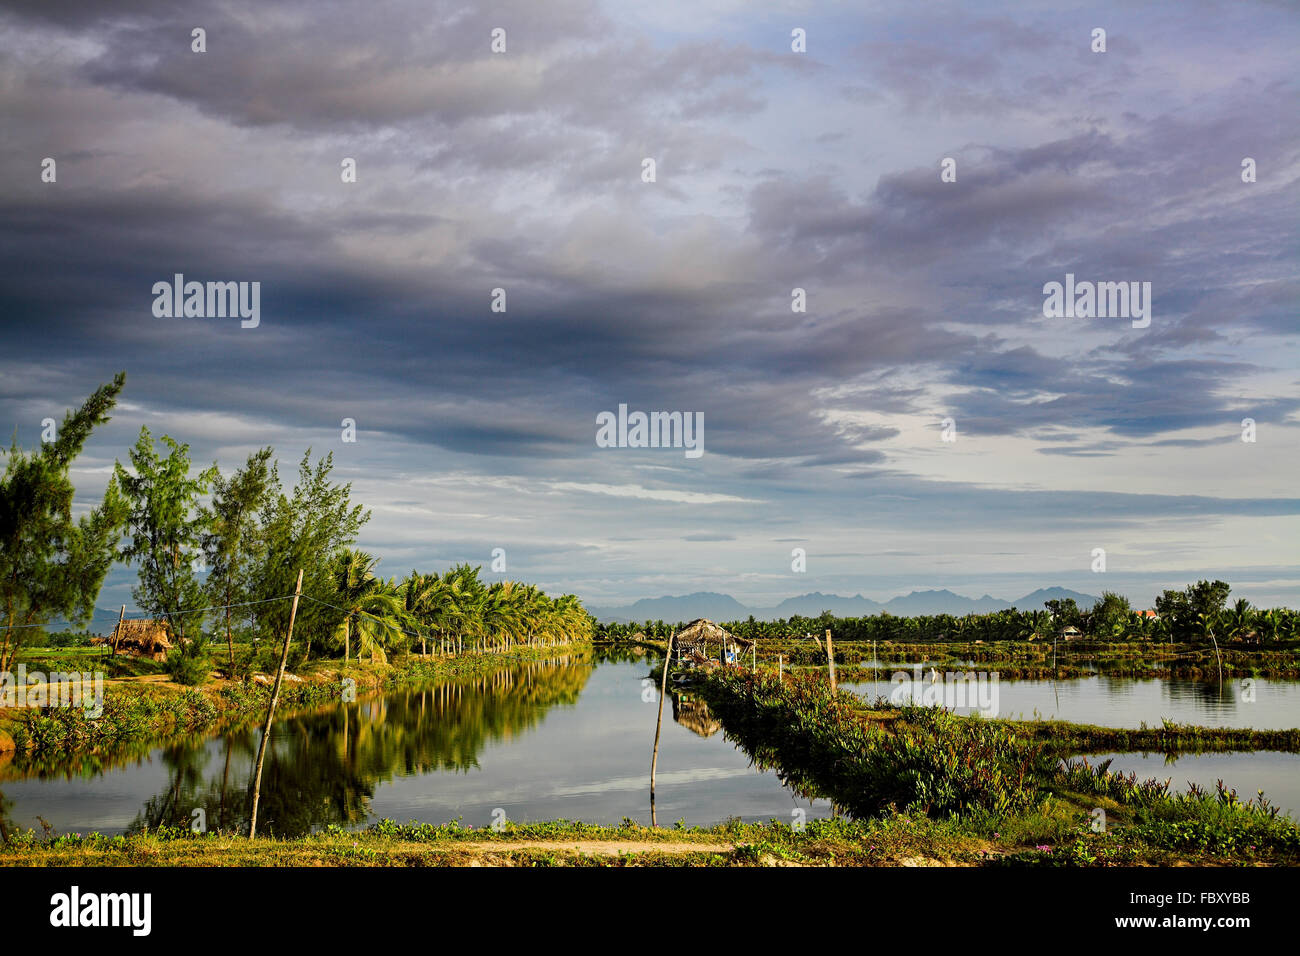 Irrigation canal system in rice field Stock Photo